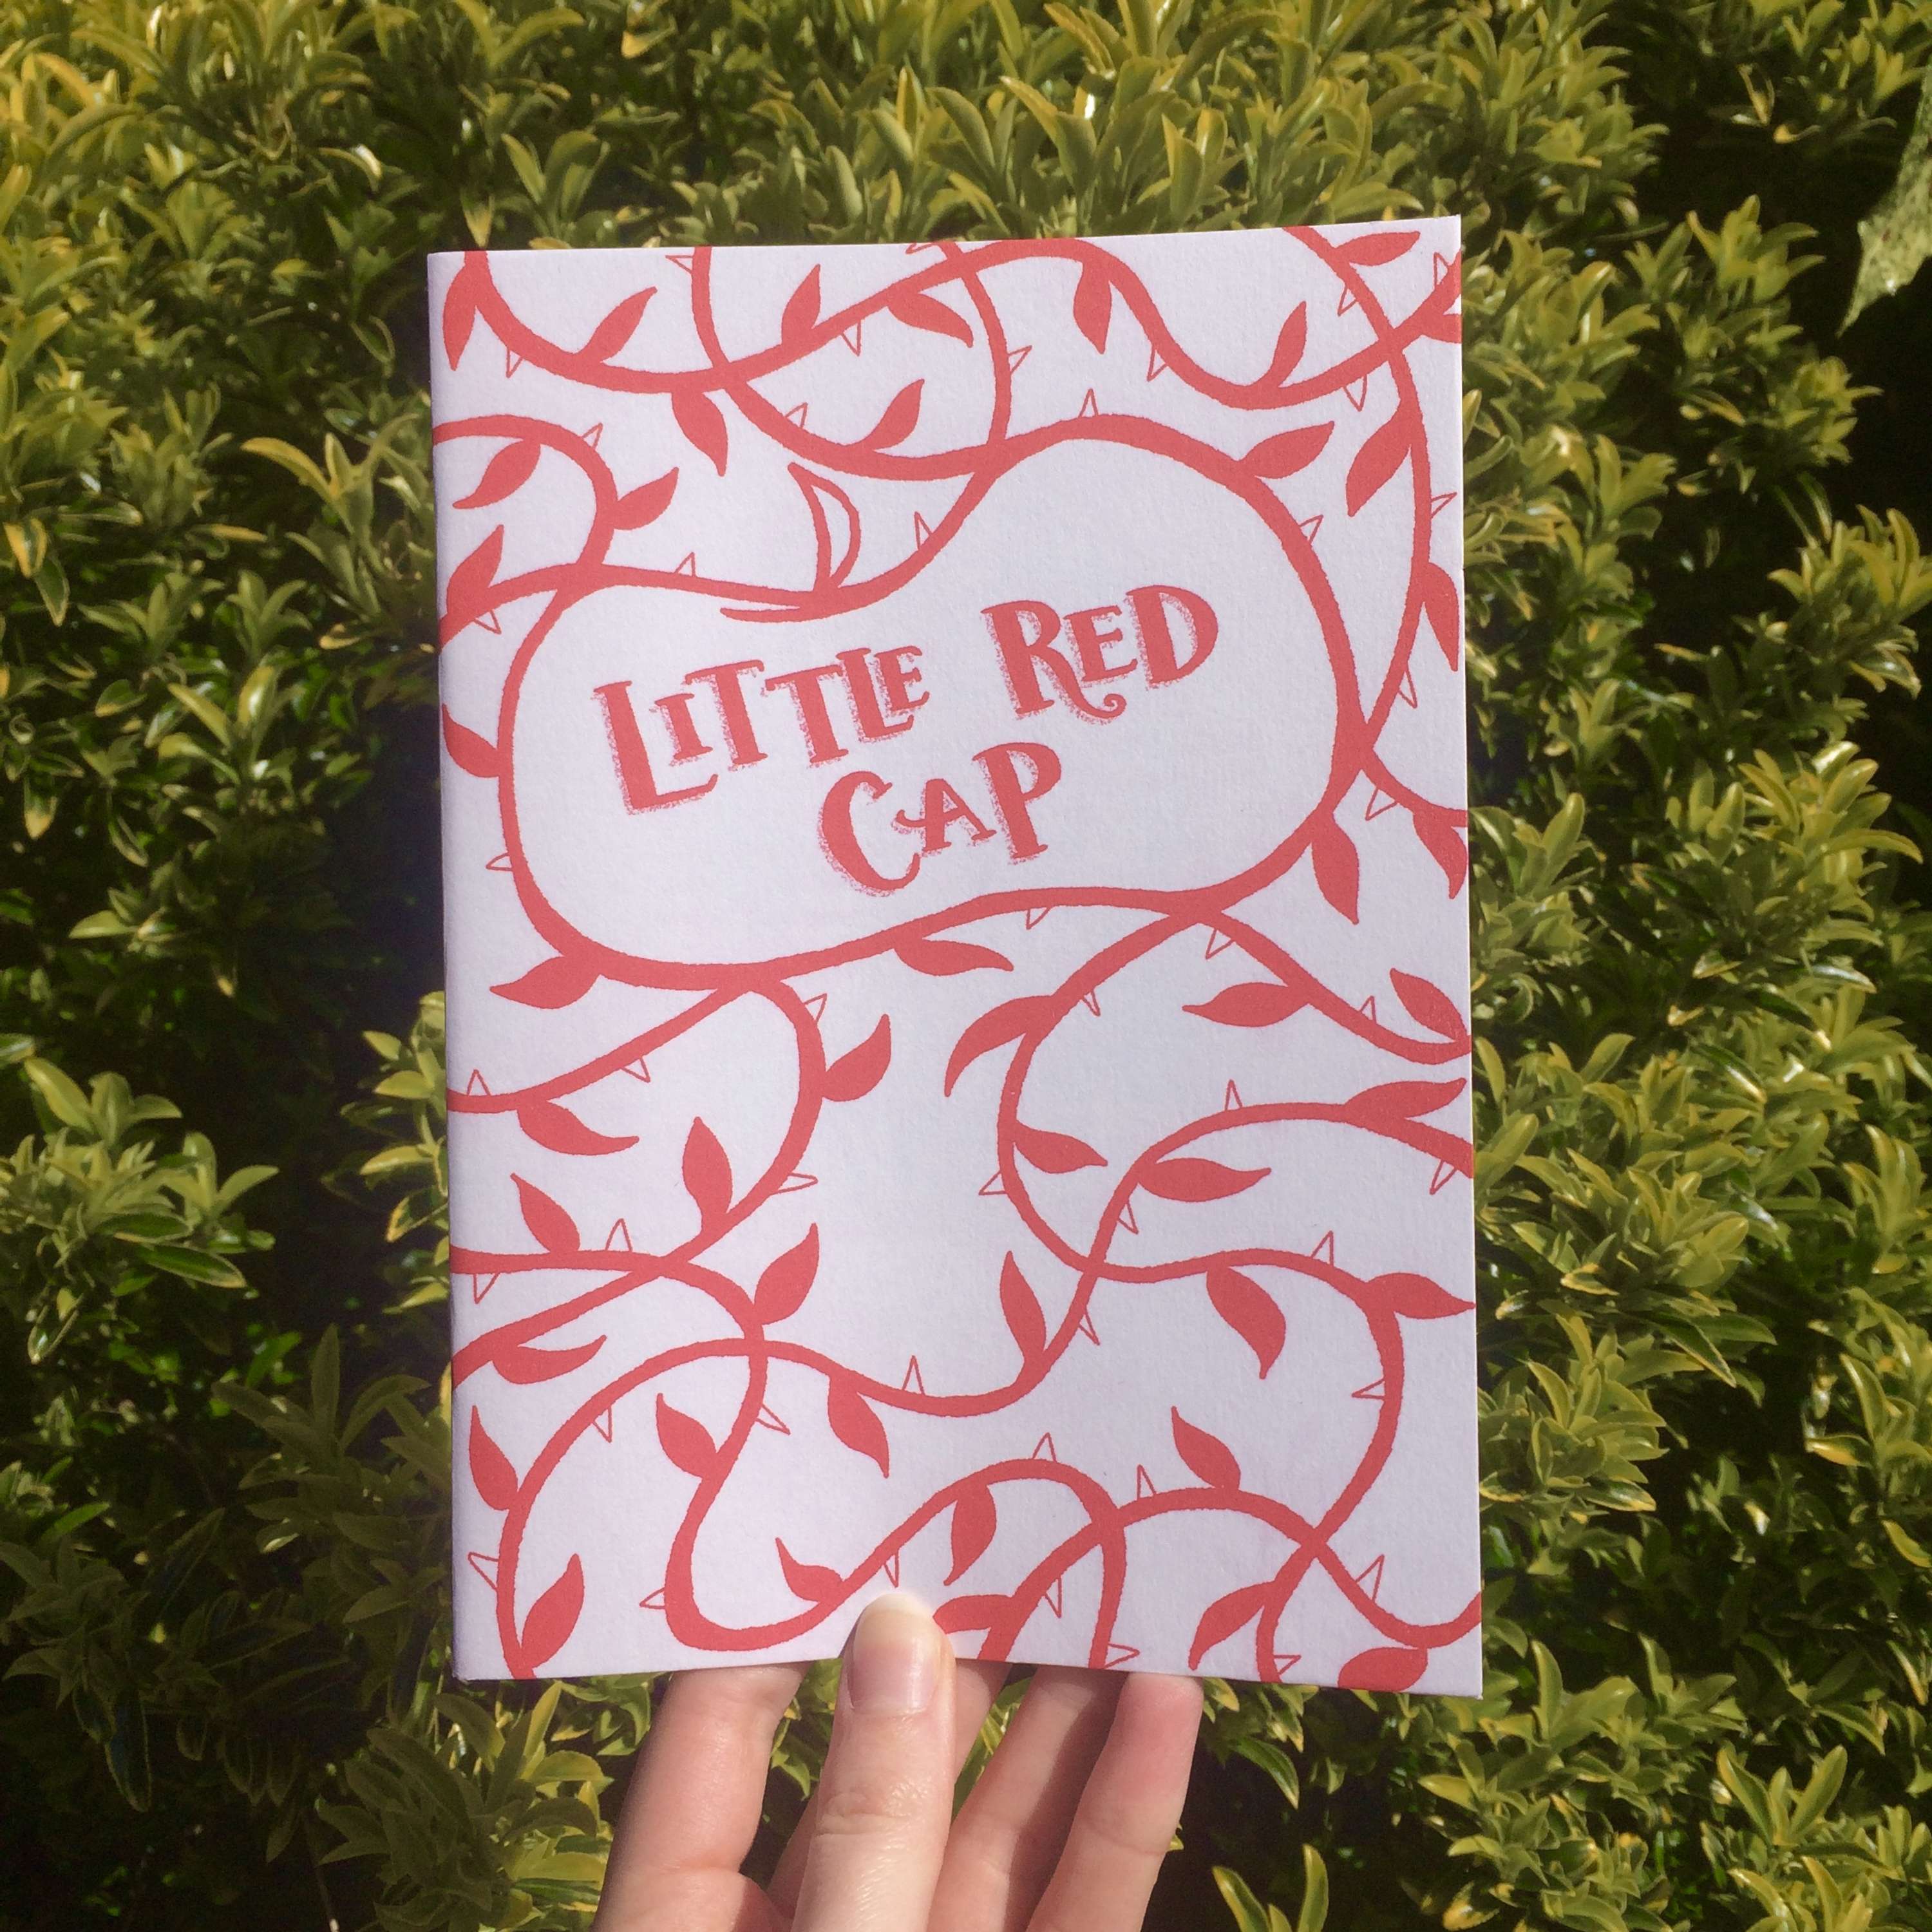 Collaboration Work - Zine 'Little Red Cap' | The